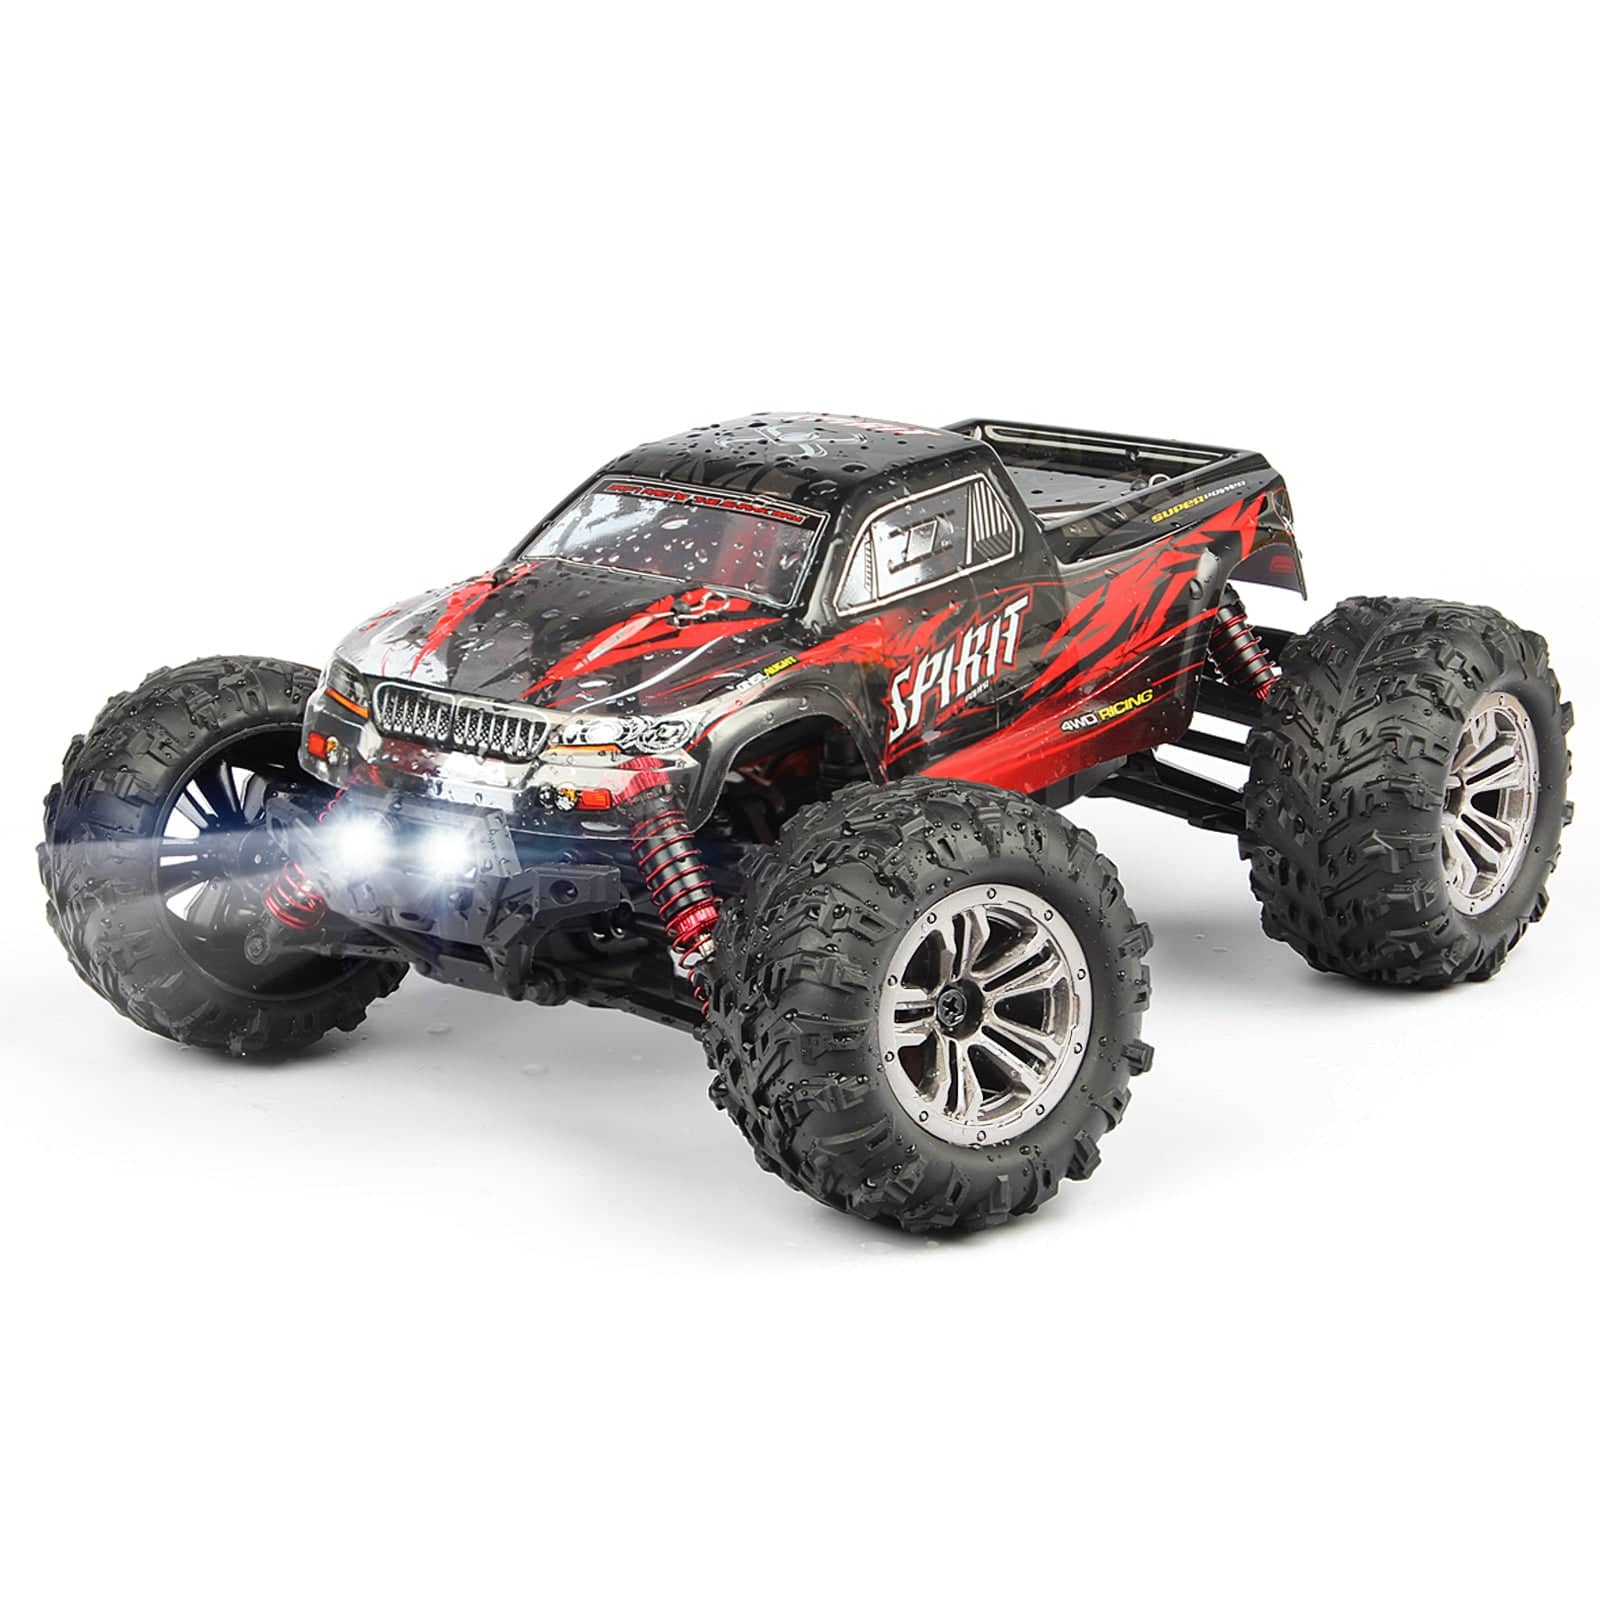 Hosim 1:16 Scale RC Car Monster Truck High Speed with 2 Batteries 9135 Red